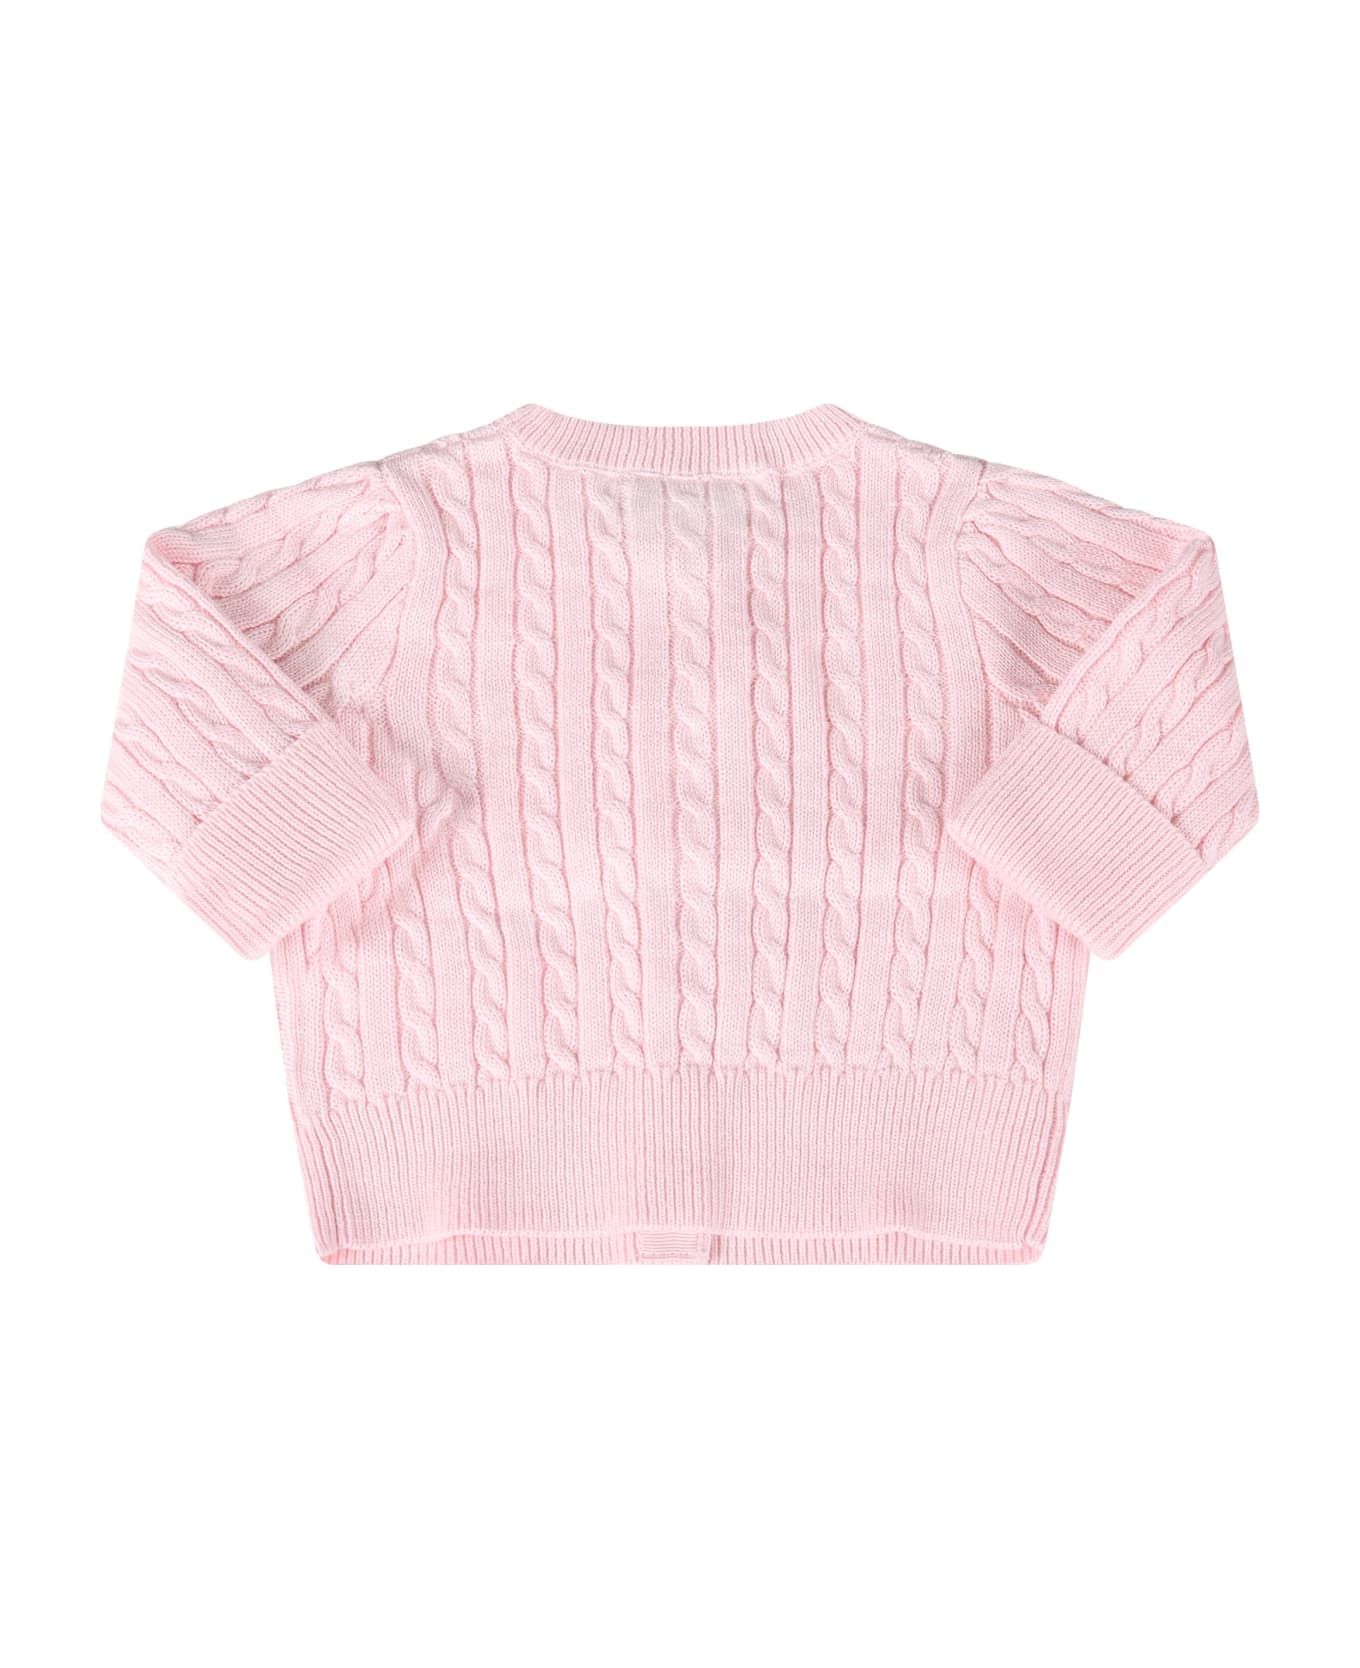 Ralph Lauren Pink Cardigan For Babygirl With Iconic Pony - Pink